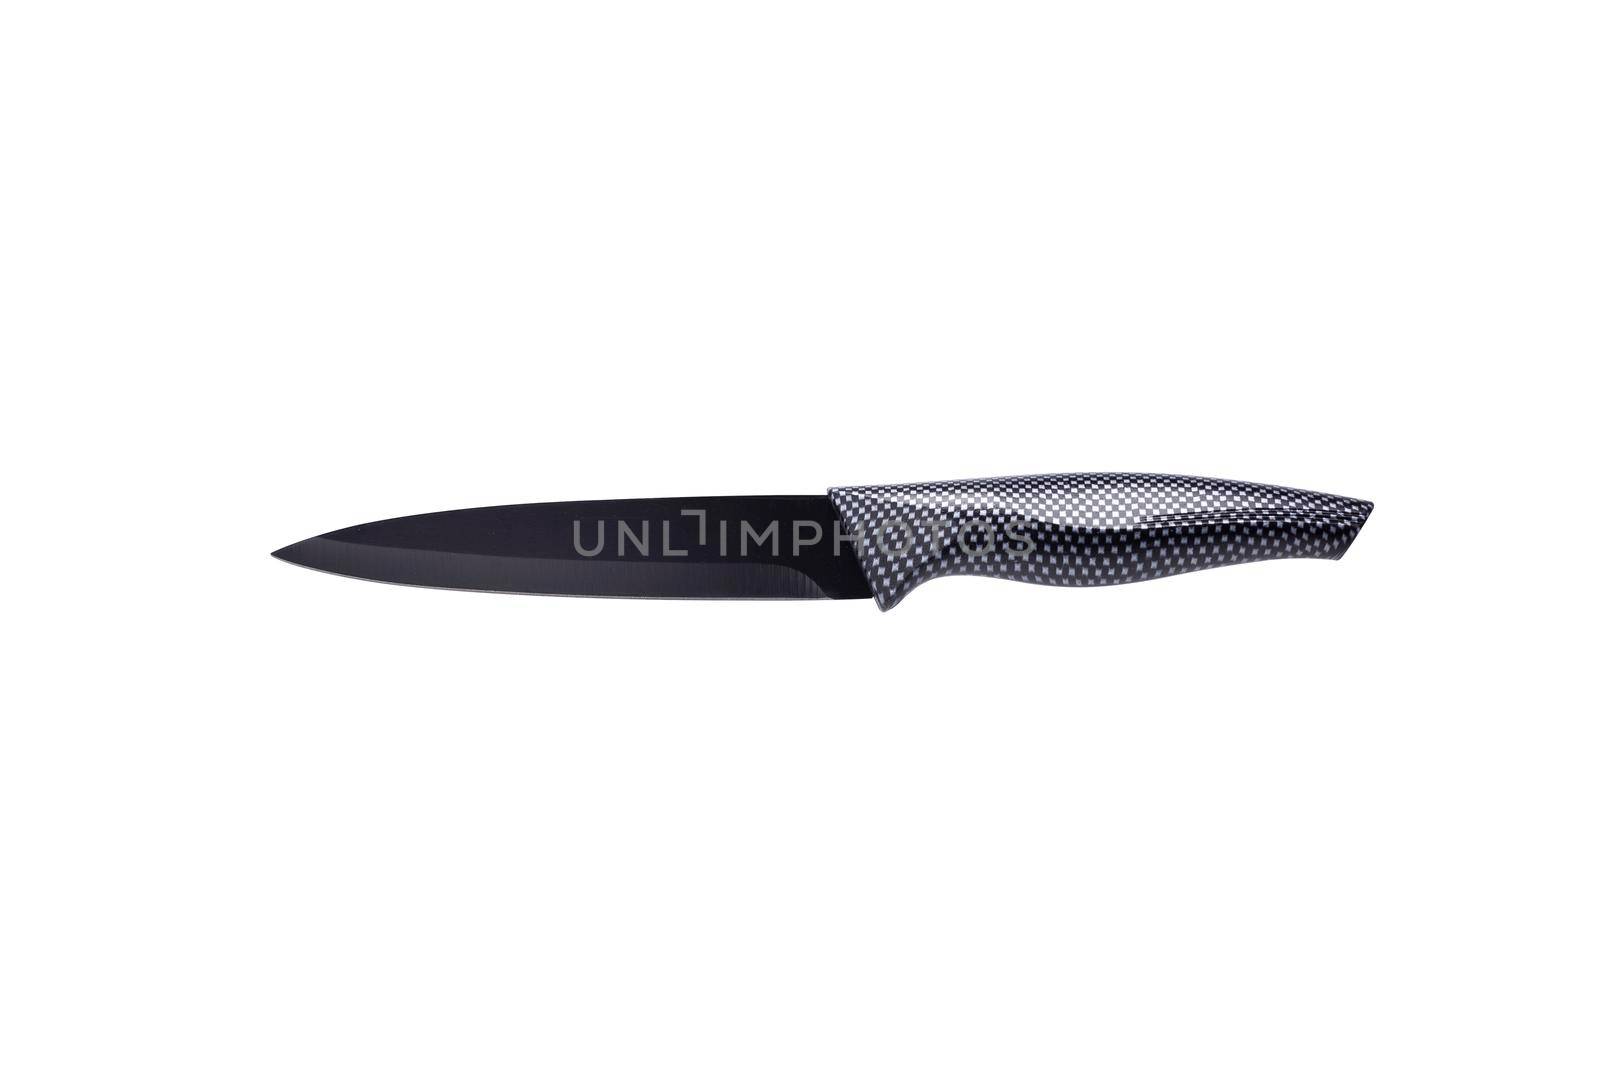 High-quality stainless steel universal knife with black non-stick antibacterial coating, isolated on white with clipping path. Ideal for professional and semi-professional kitchen work.